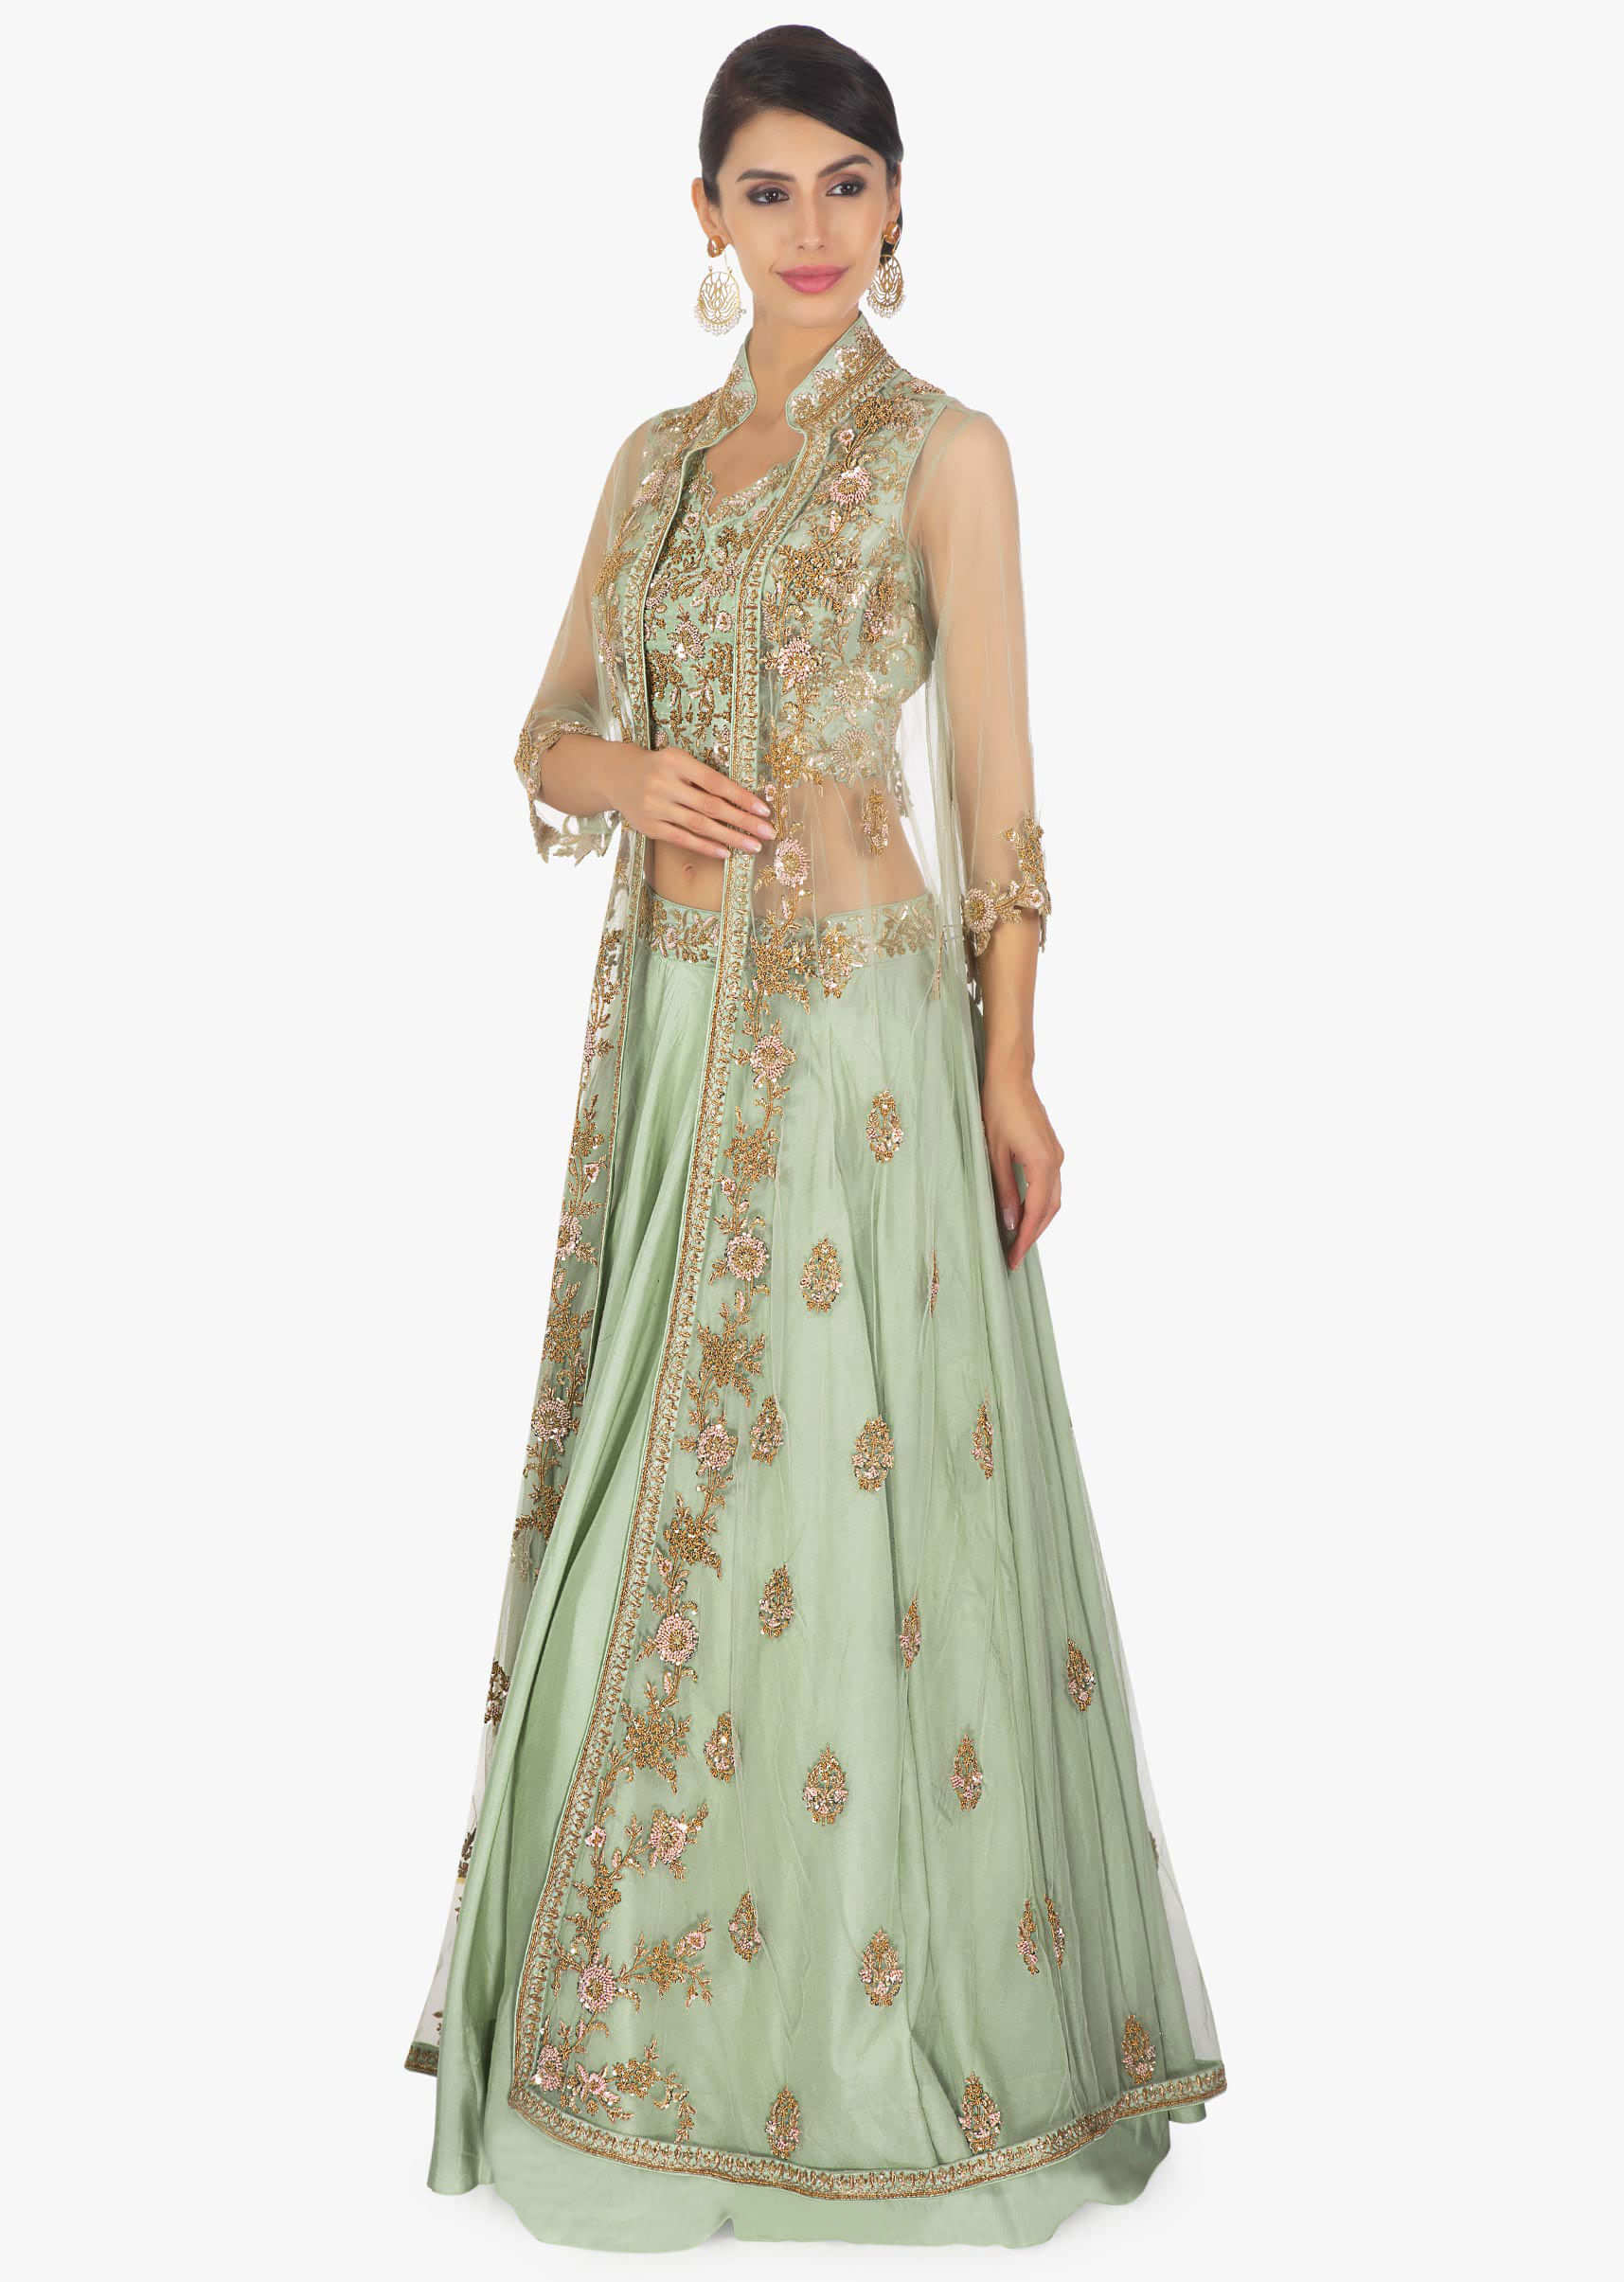 Fern green cotton silk lehenga  paired with a matching blouse and an additional net jacket